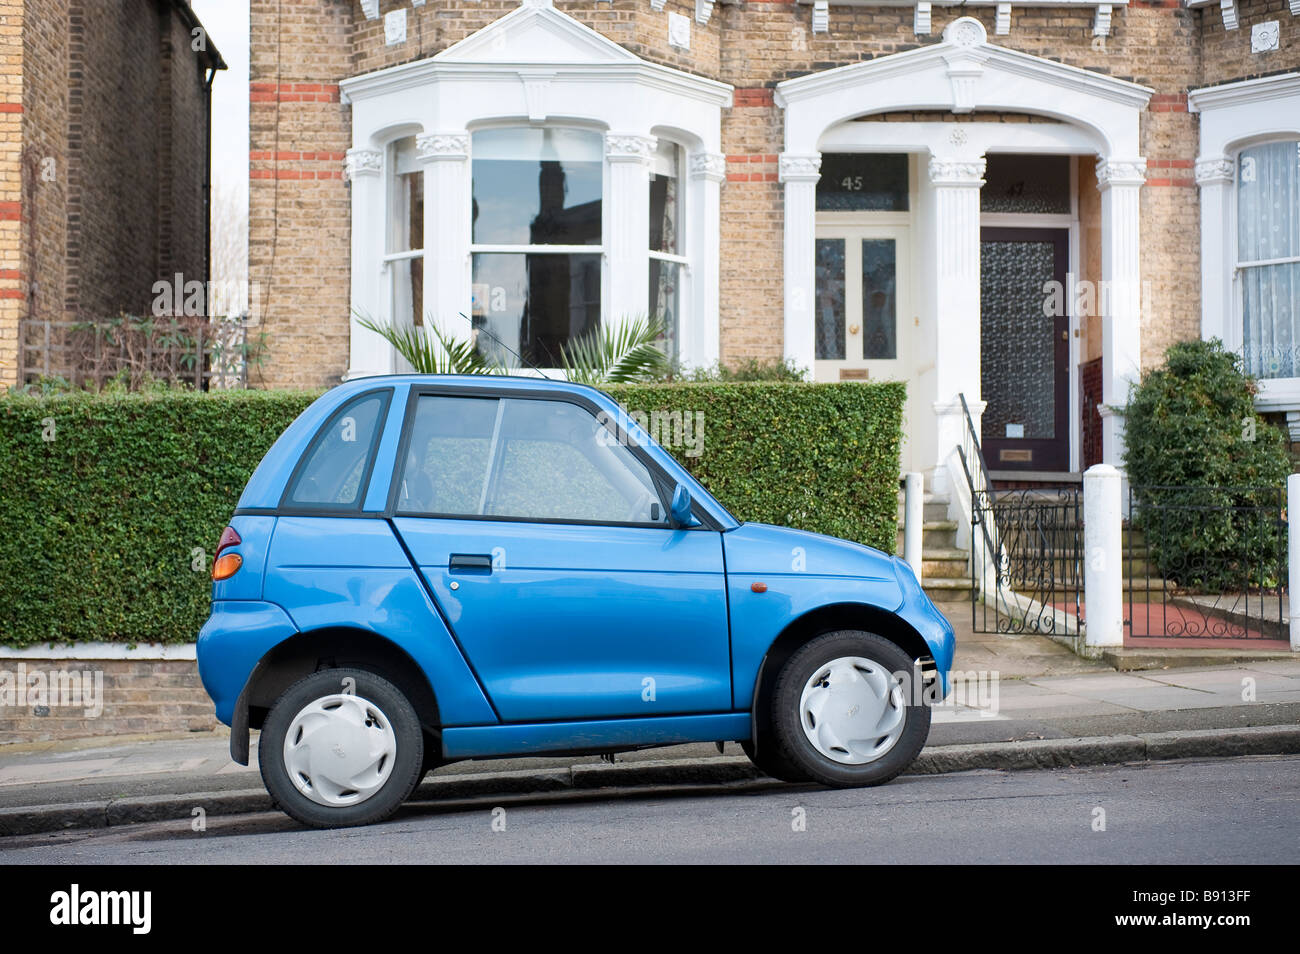 G-Wiz electric car parked in a residential street in London Stock Photo